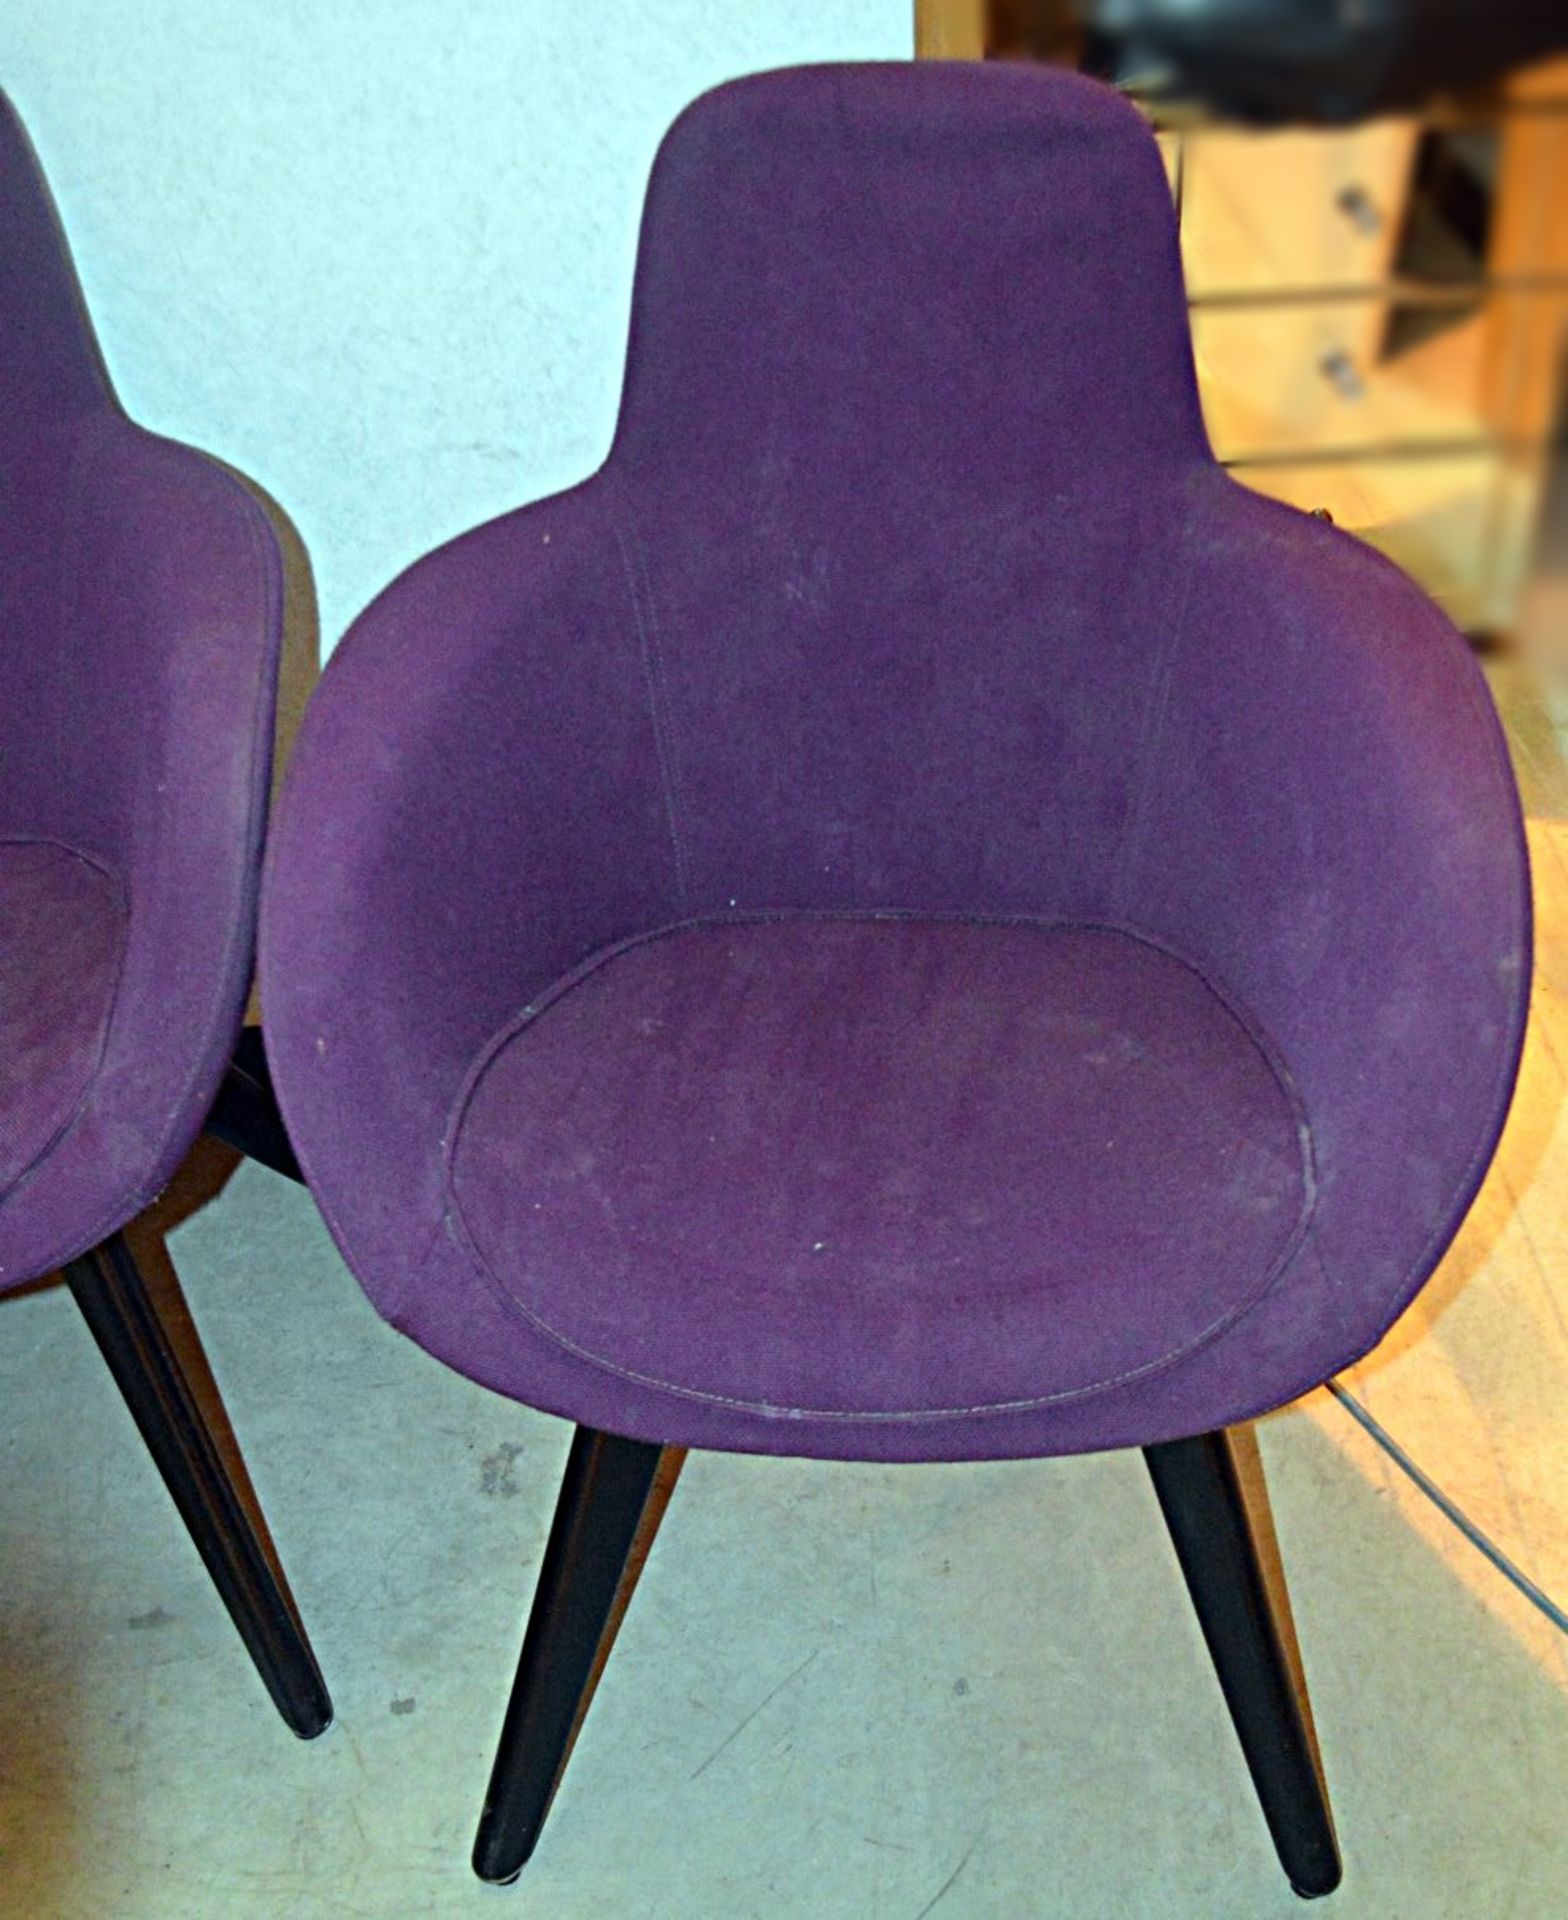 9 x TOM DIXON High Back Designer Scoop Chair - Upholstered In A Vibrant Purple Mollie Melton Fabric - Image 3 of 8